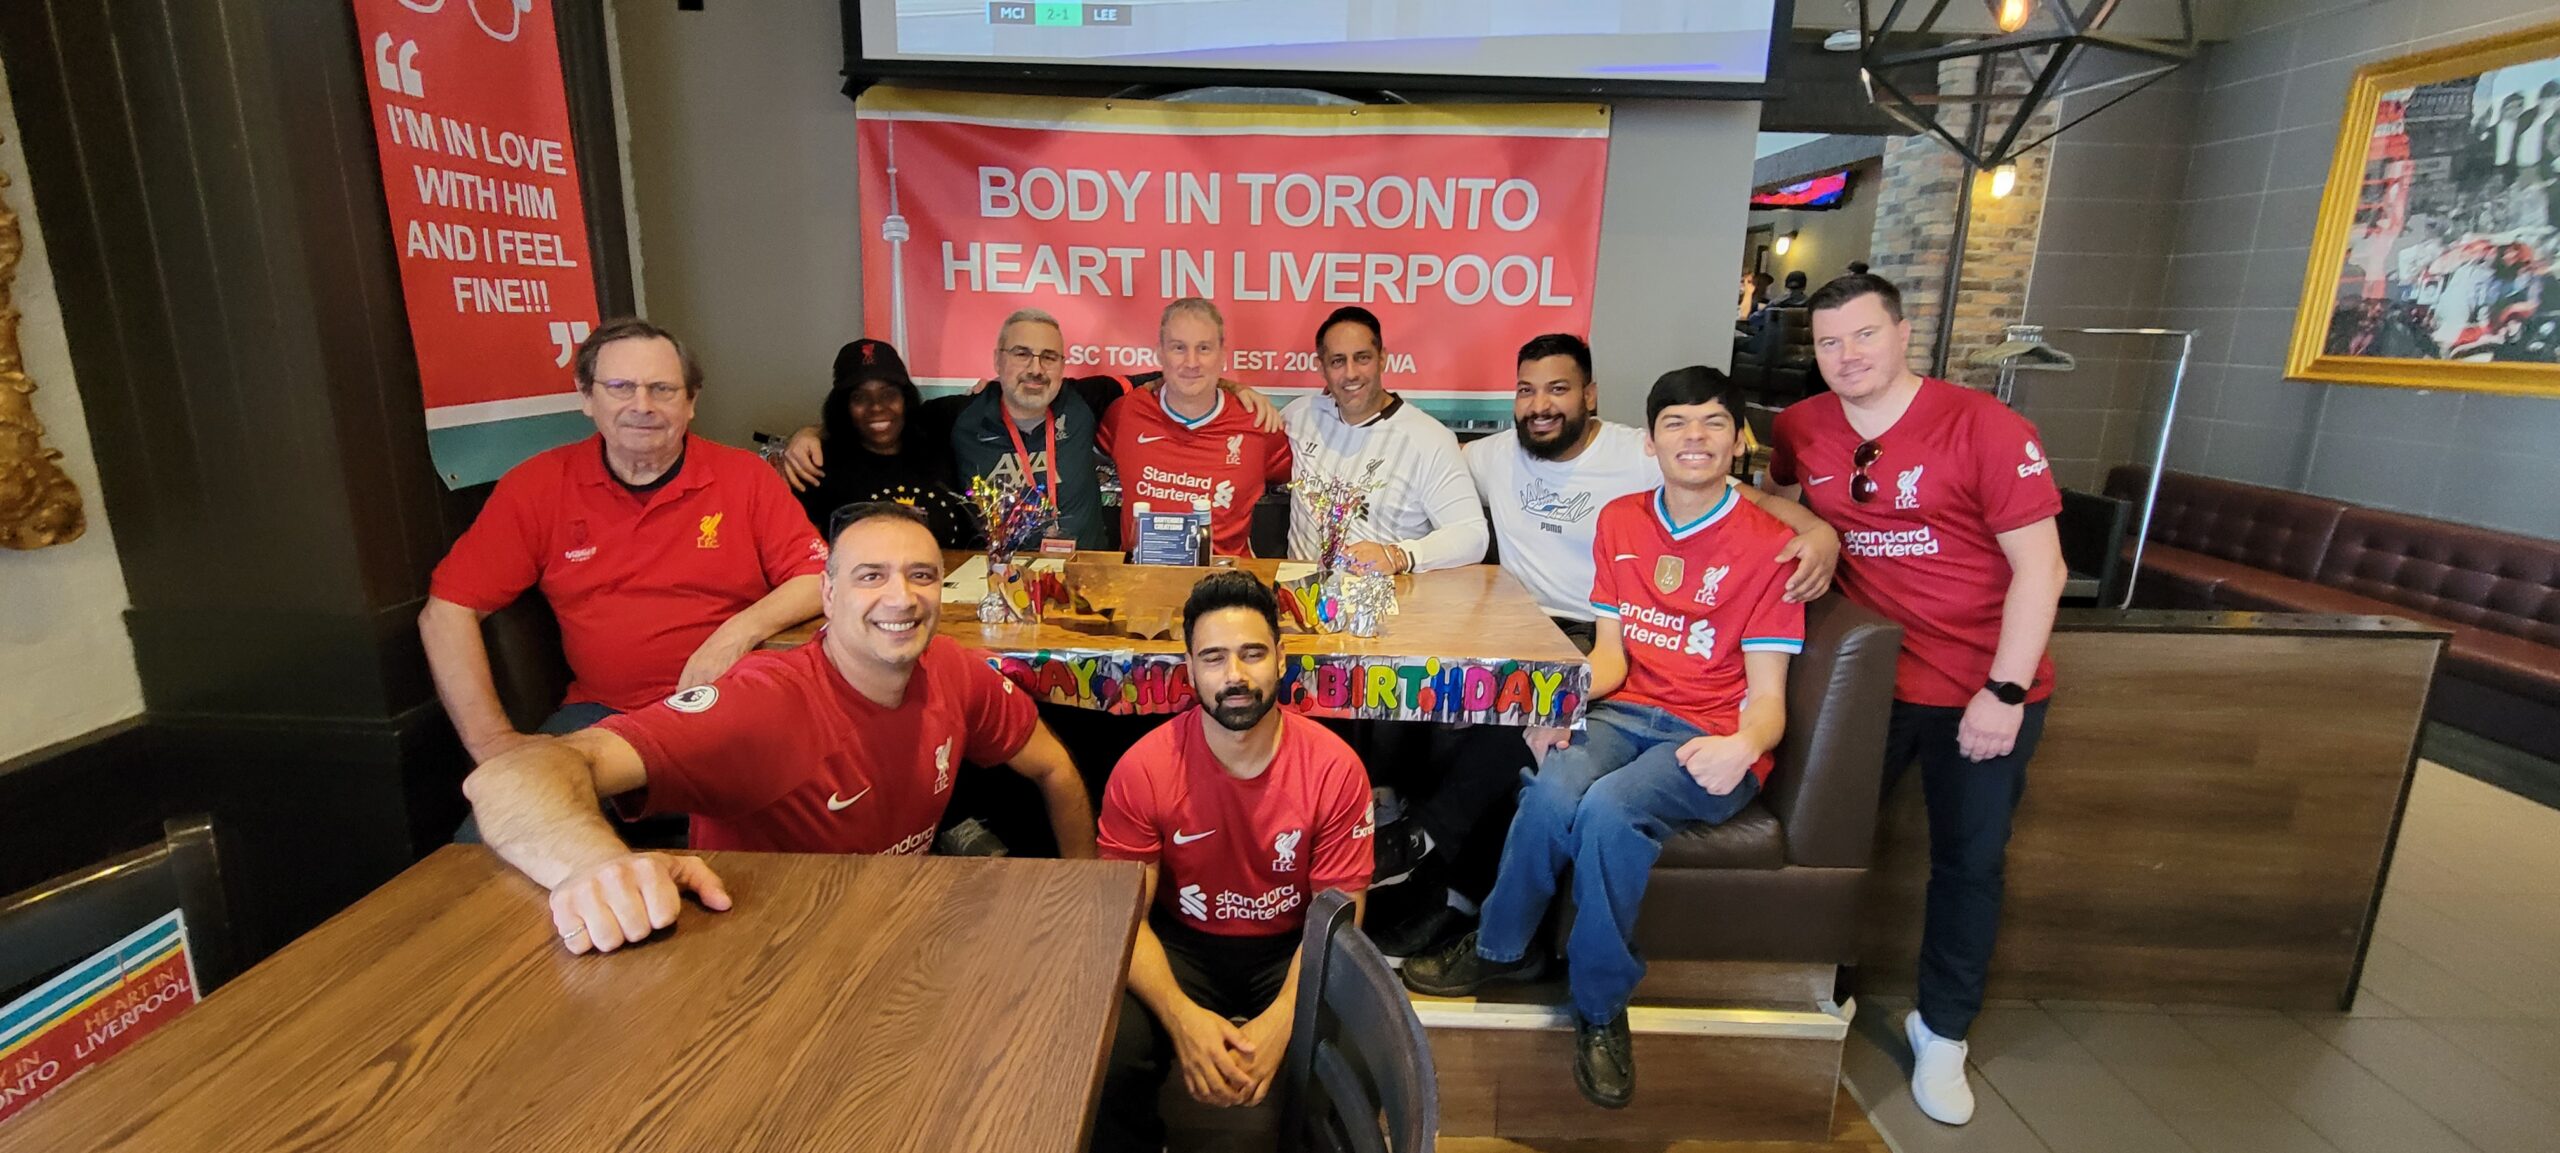 Official Supporters Club Toronto watch LFC at pub